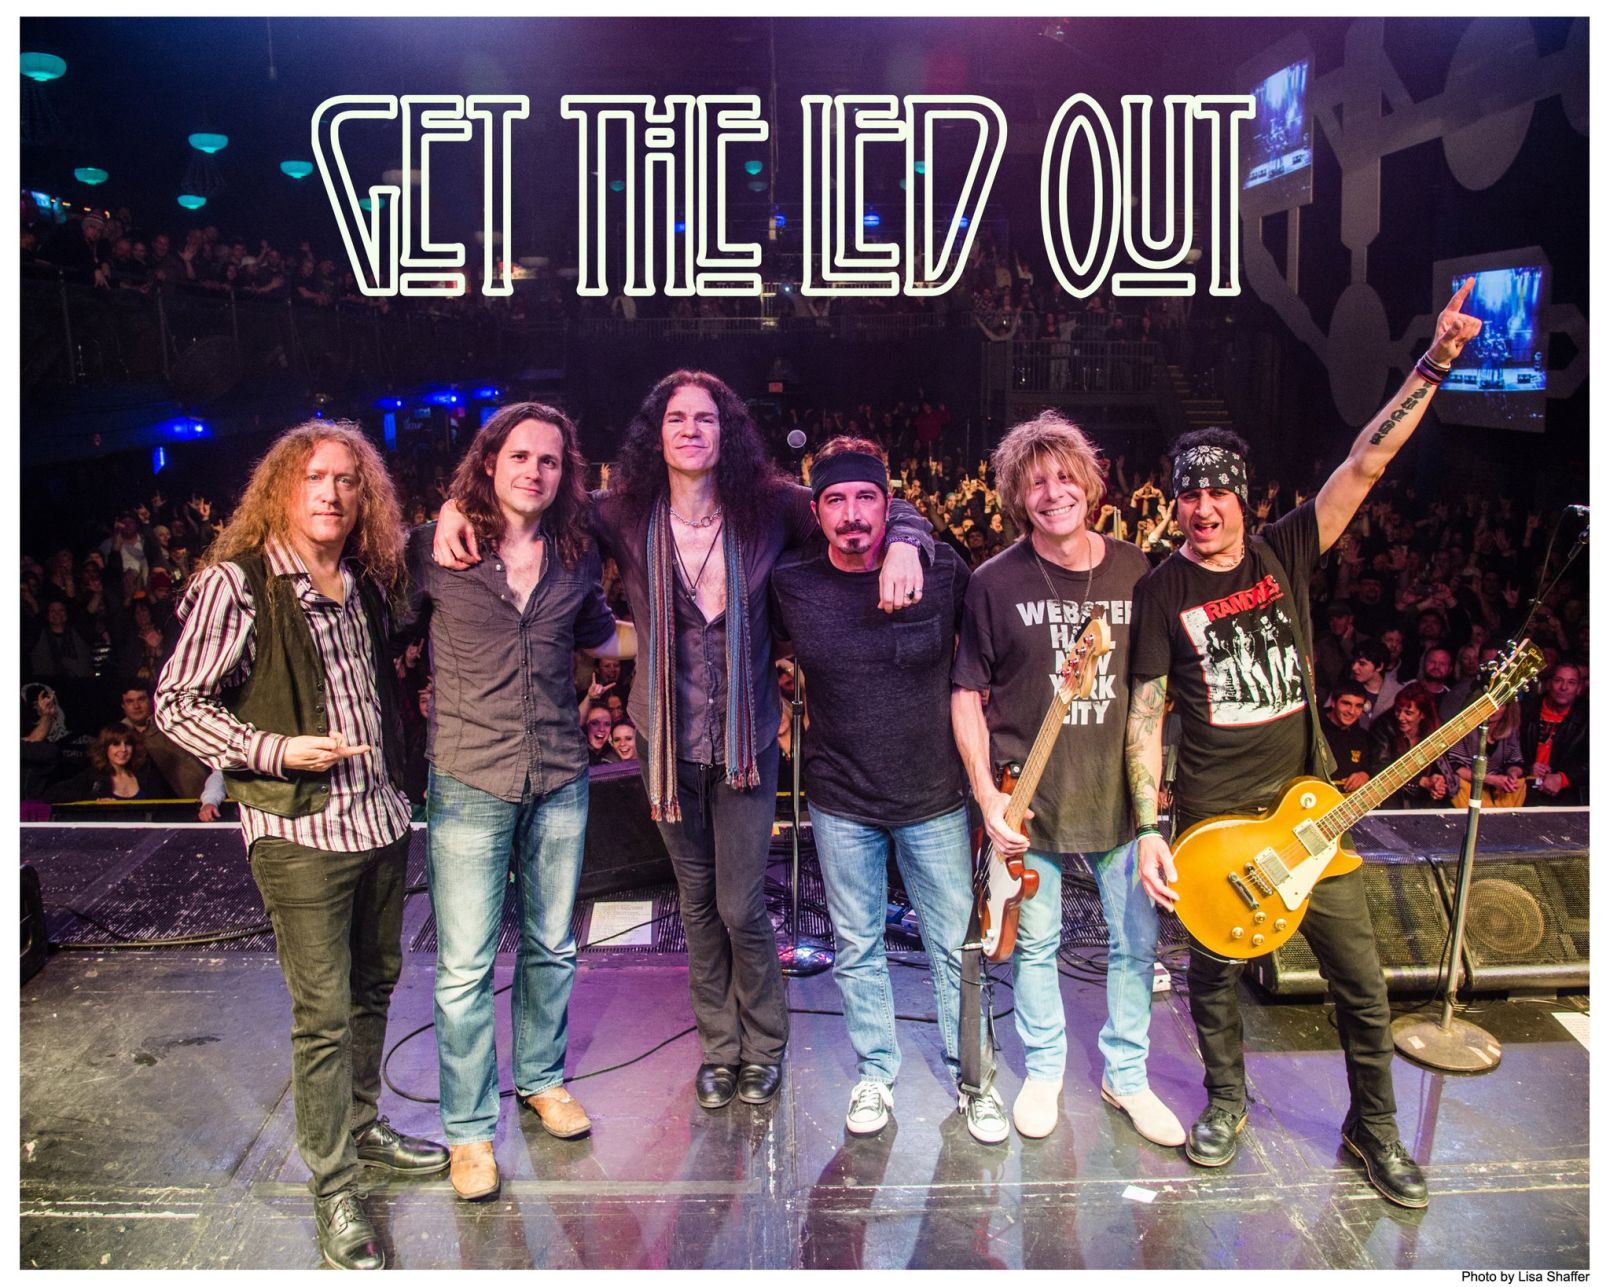 Led Zeppelin tribute Get the Led Out returns to F.M. Kirby Center in  Wilkes-Barre on Dec. 28